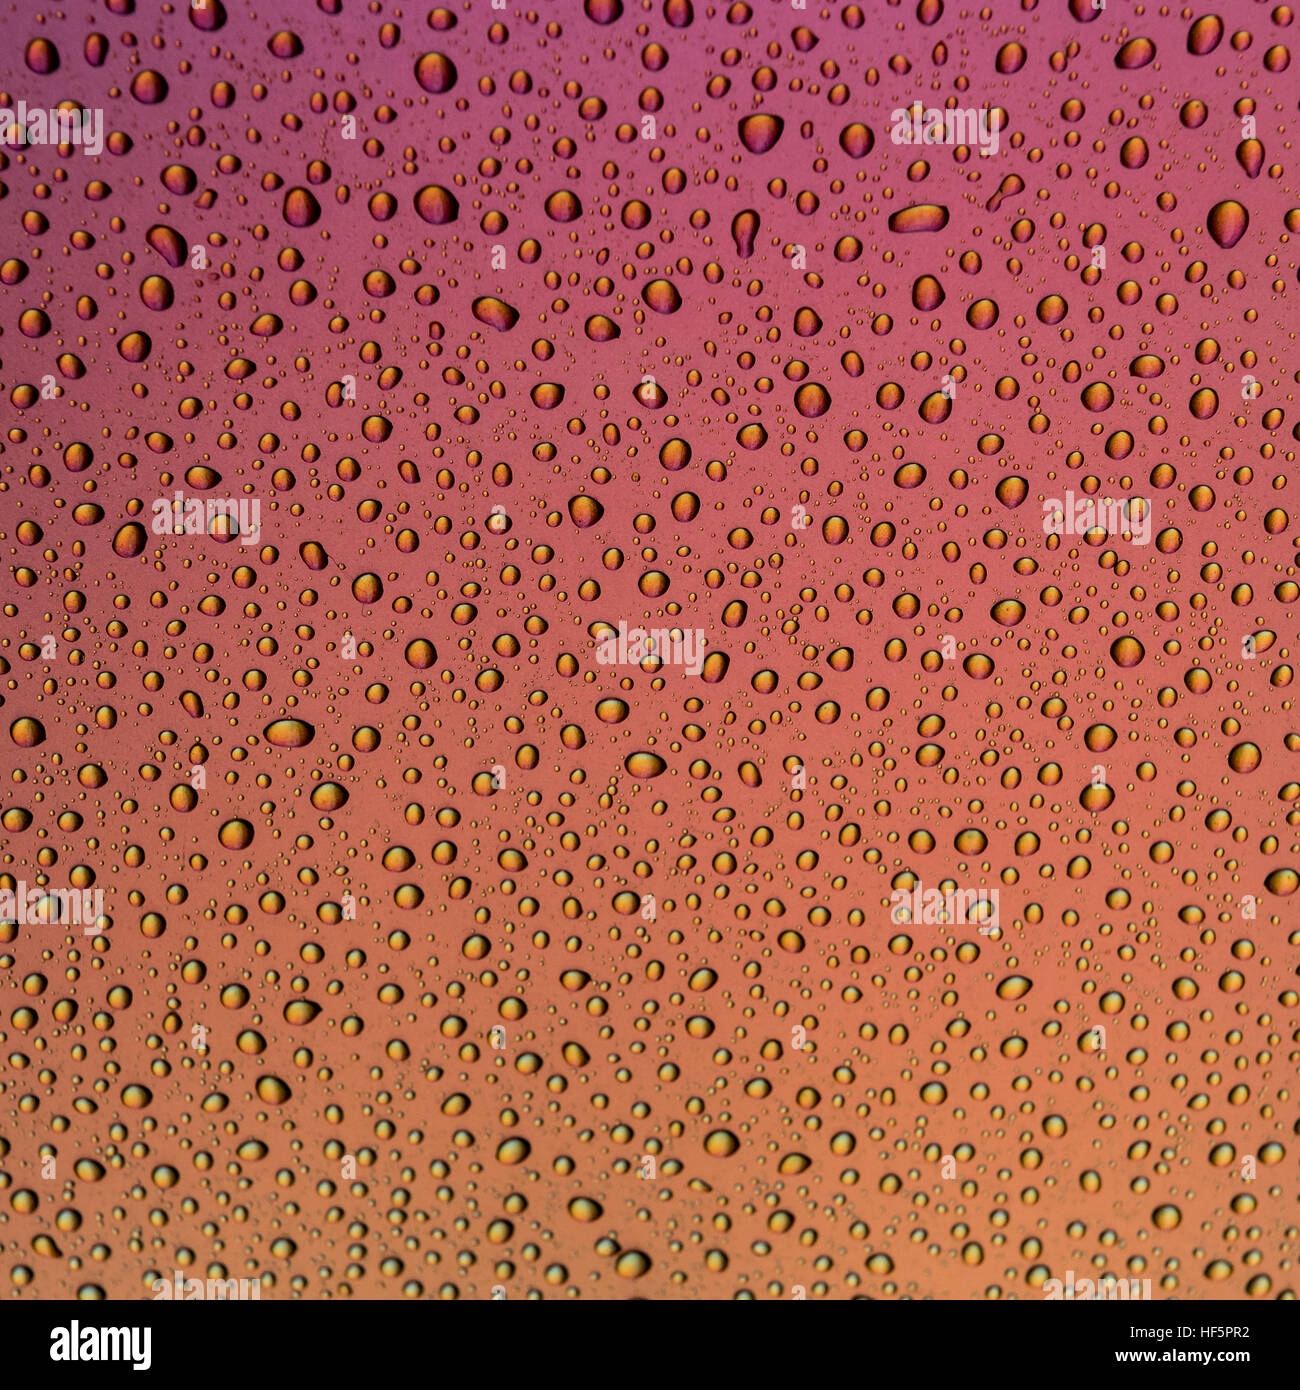 Water drops on a mettalic surface with a pink to orange and yellow gradient Stock Photo